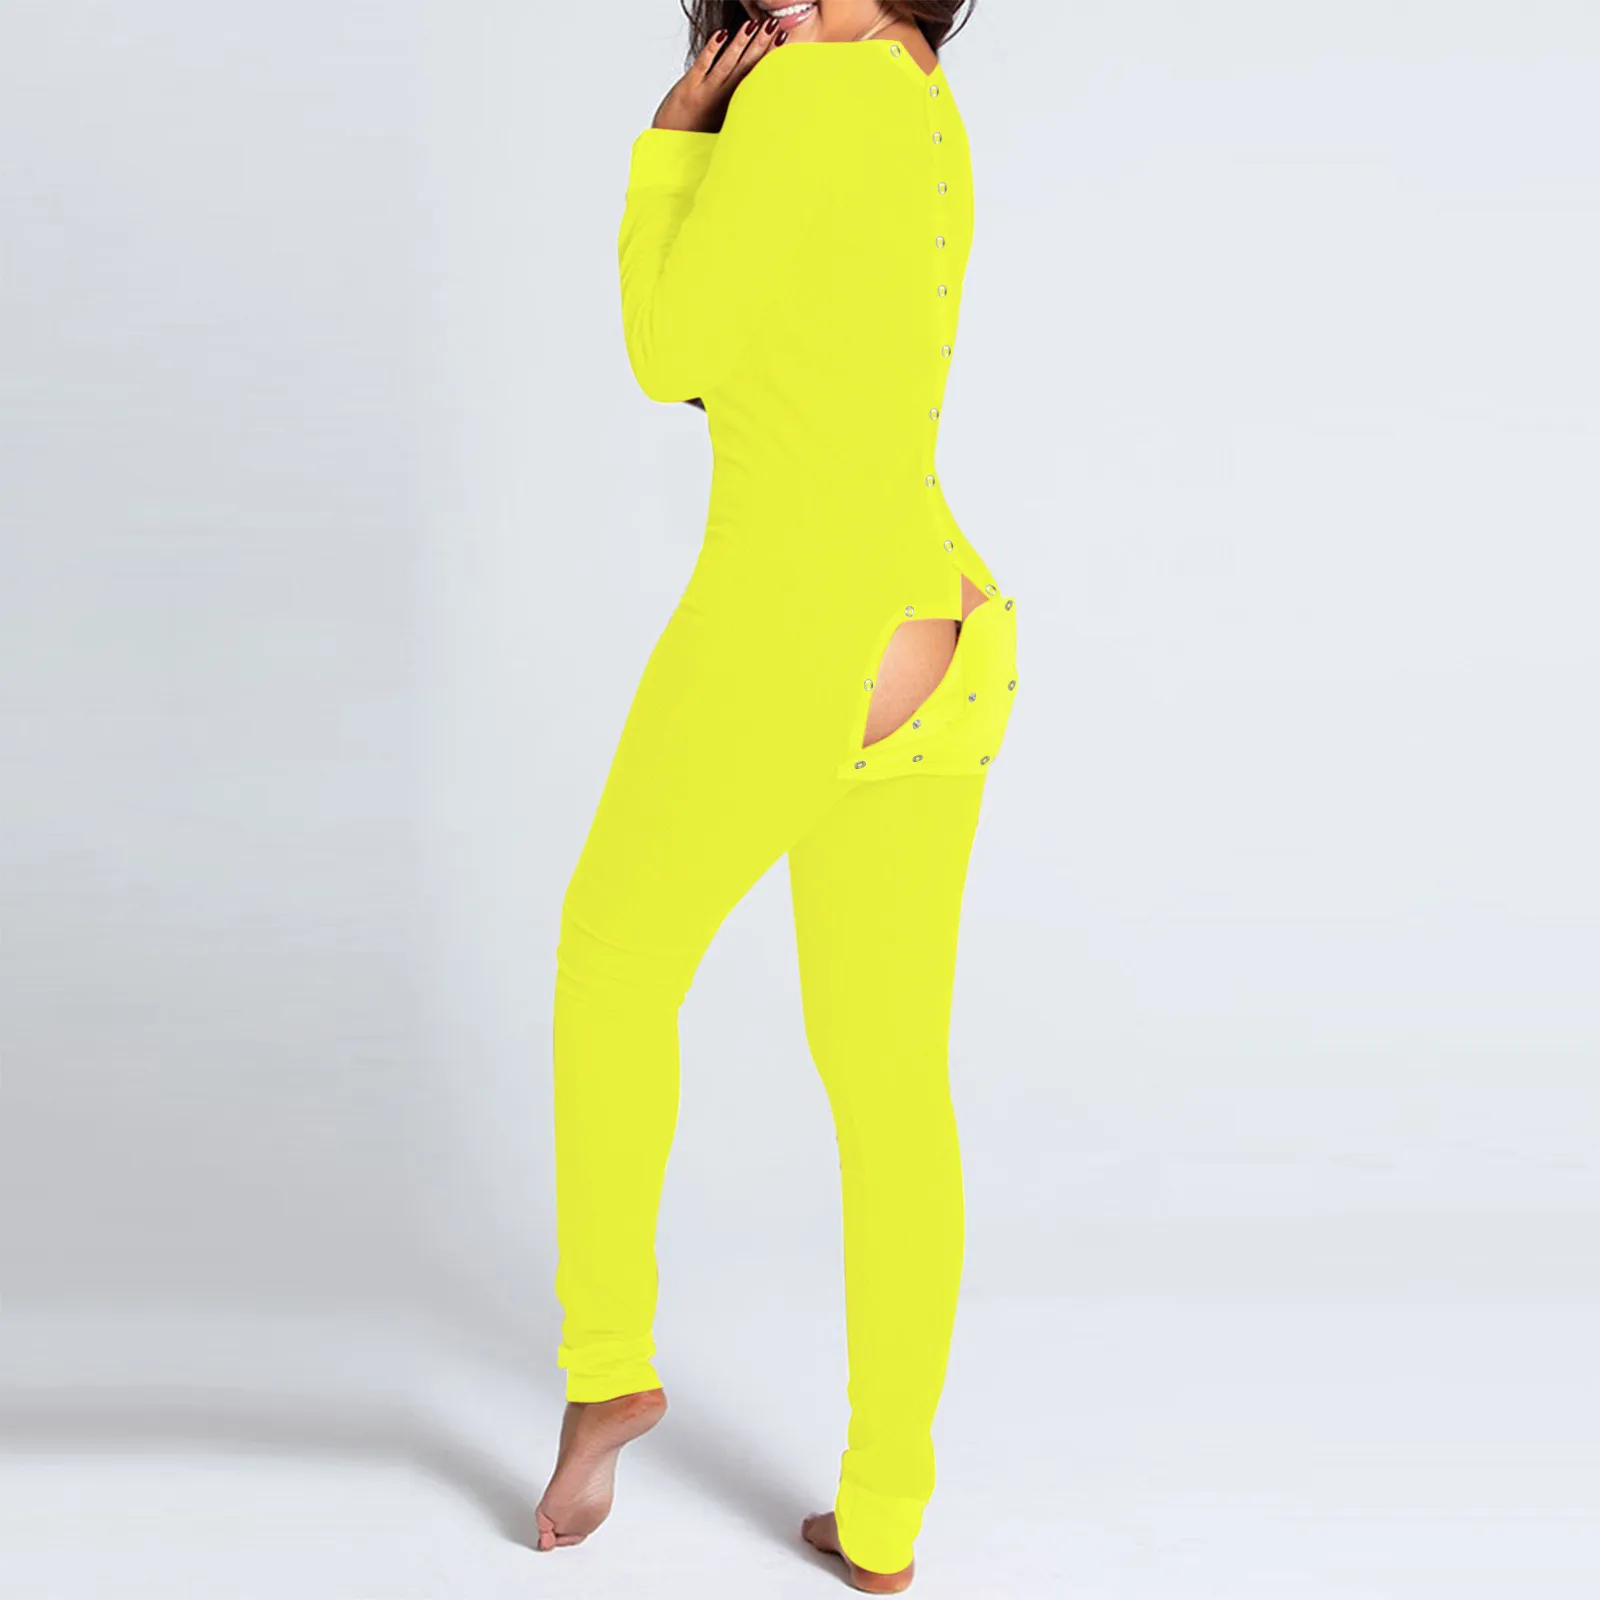 

Solid Color Sexy Pajama Jumpsuit Women V-neck Long Sleeve Onesies Butt Buttoned Flap Long Sleepwear Romper Overalls Nightwear